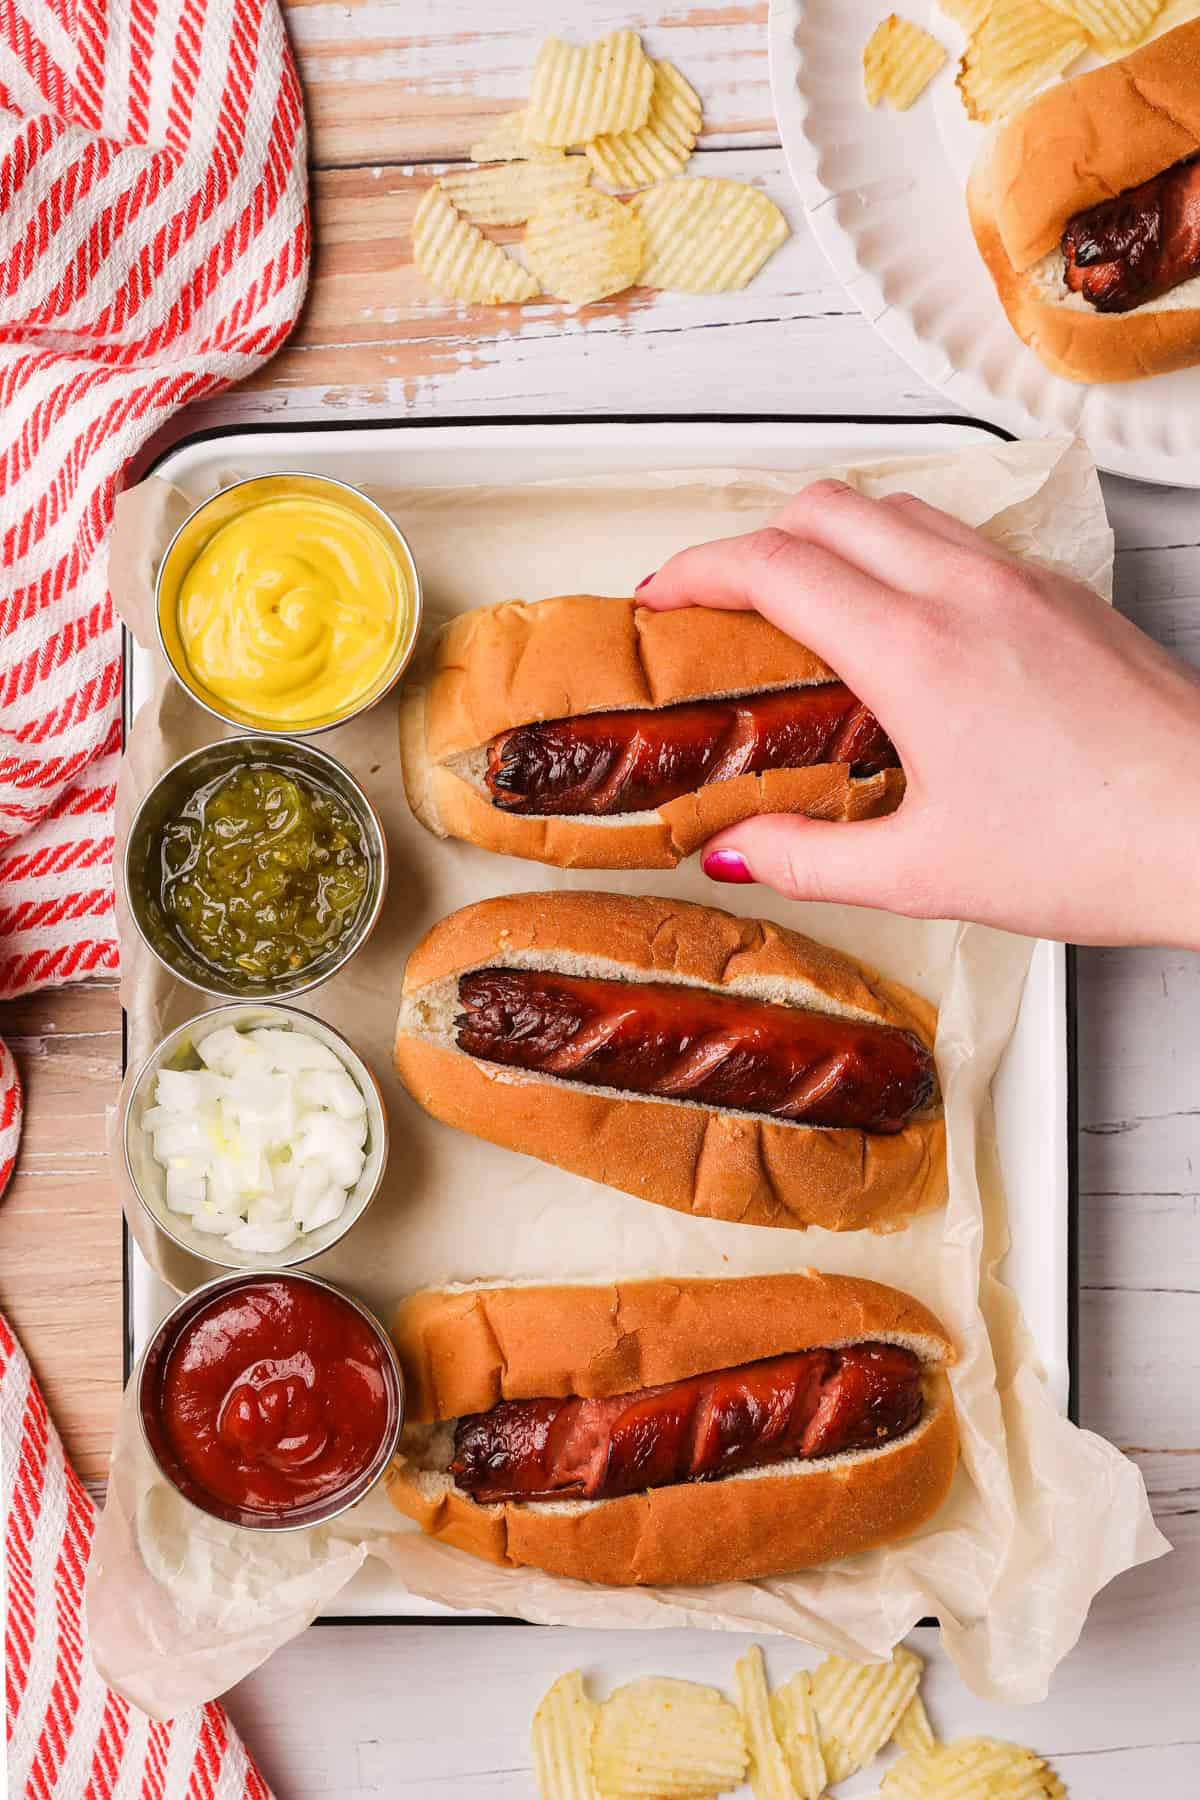 a hand taking a hot dog from a platter